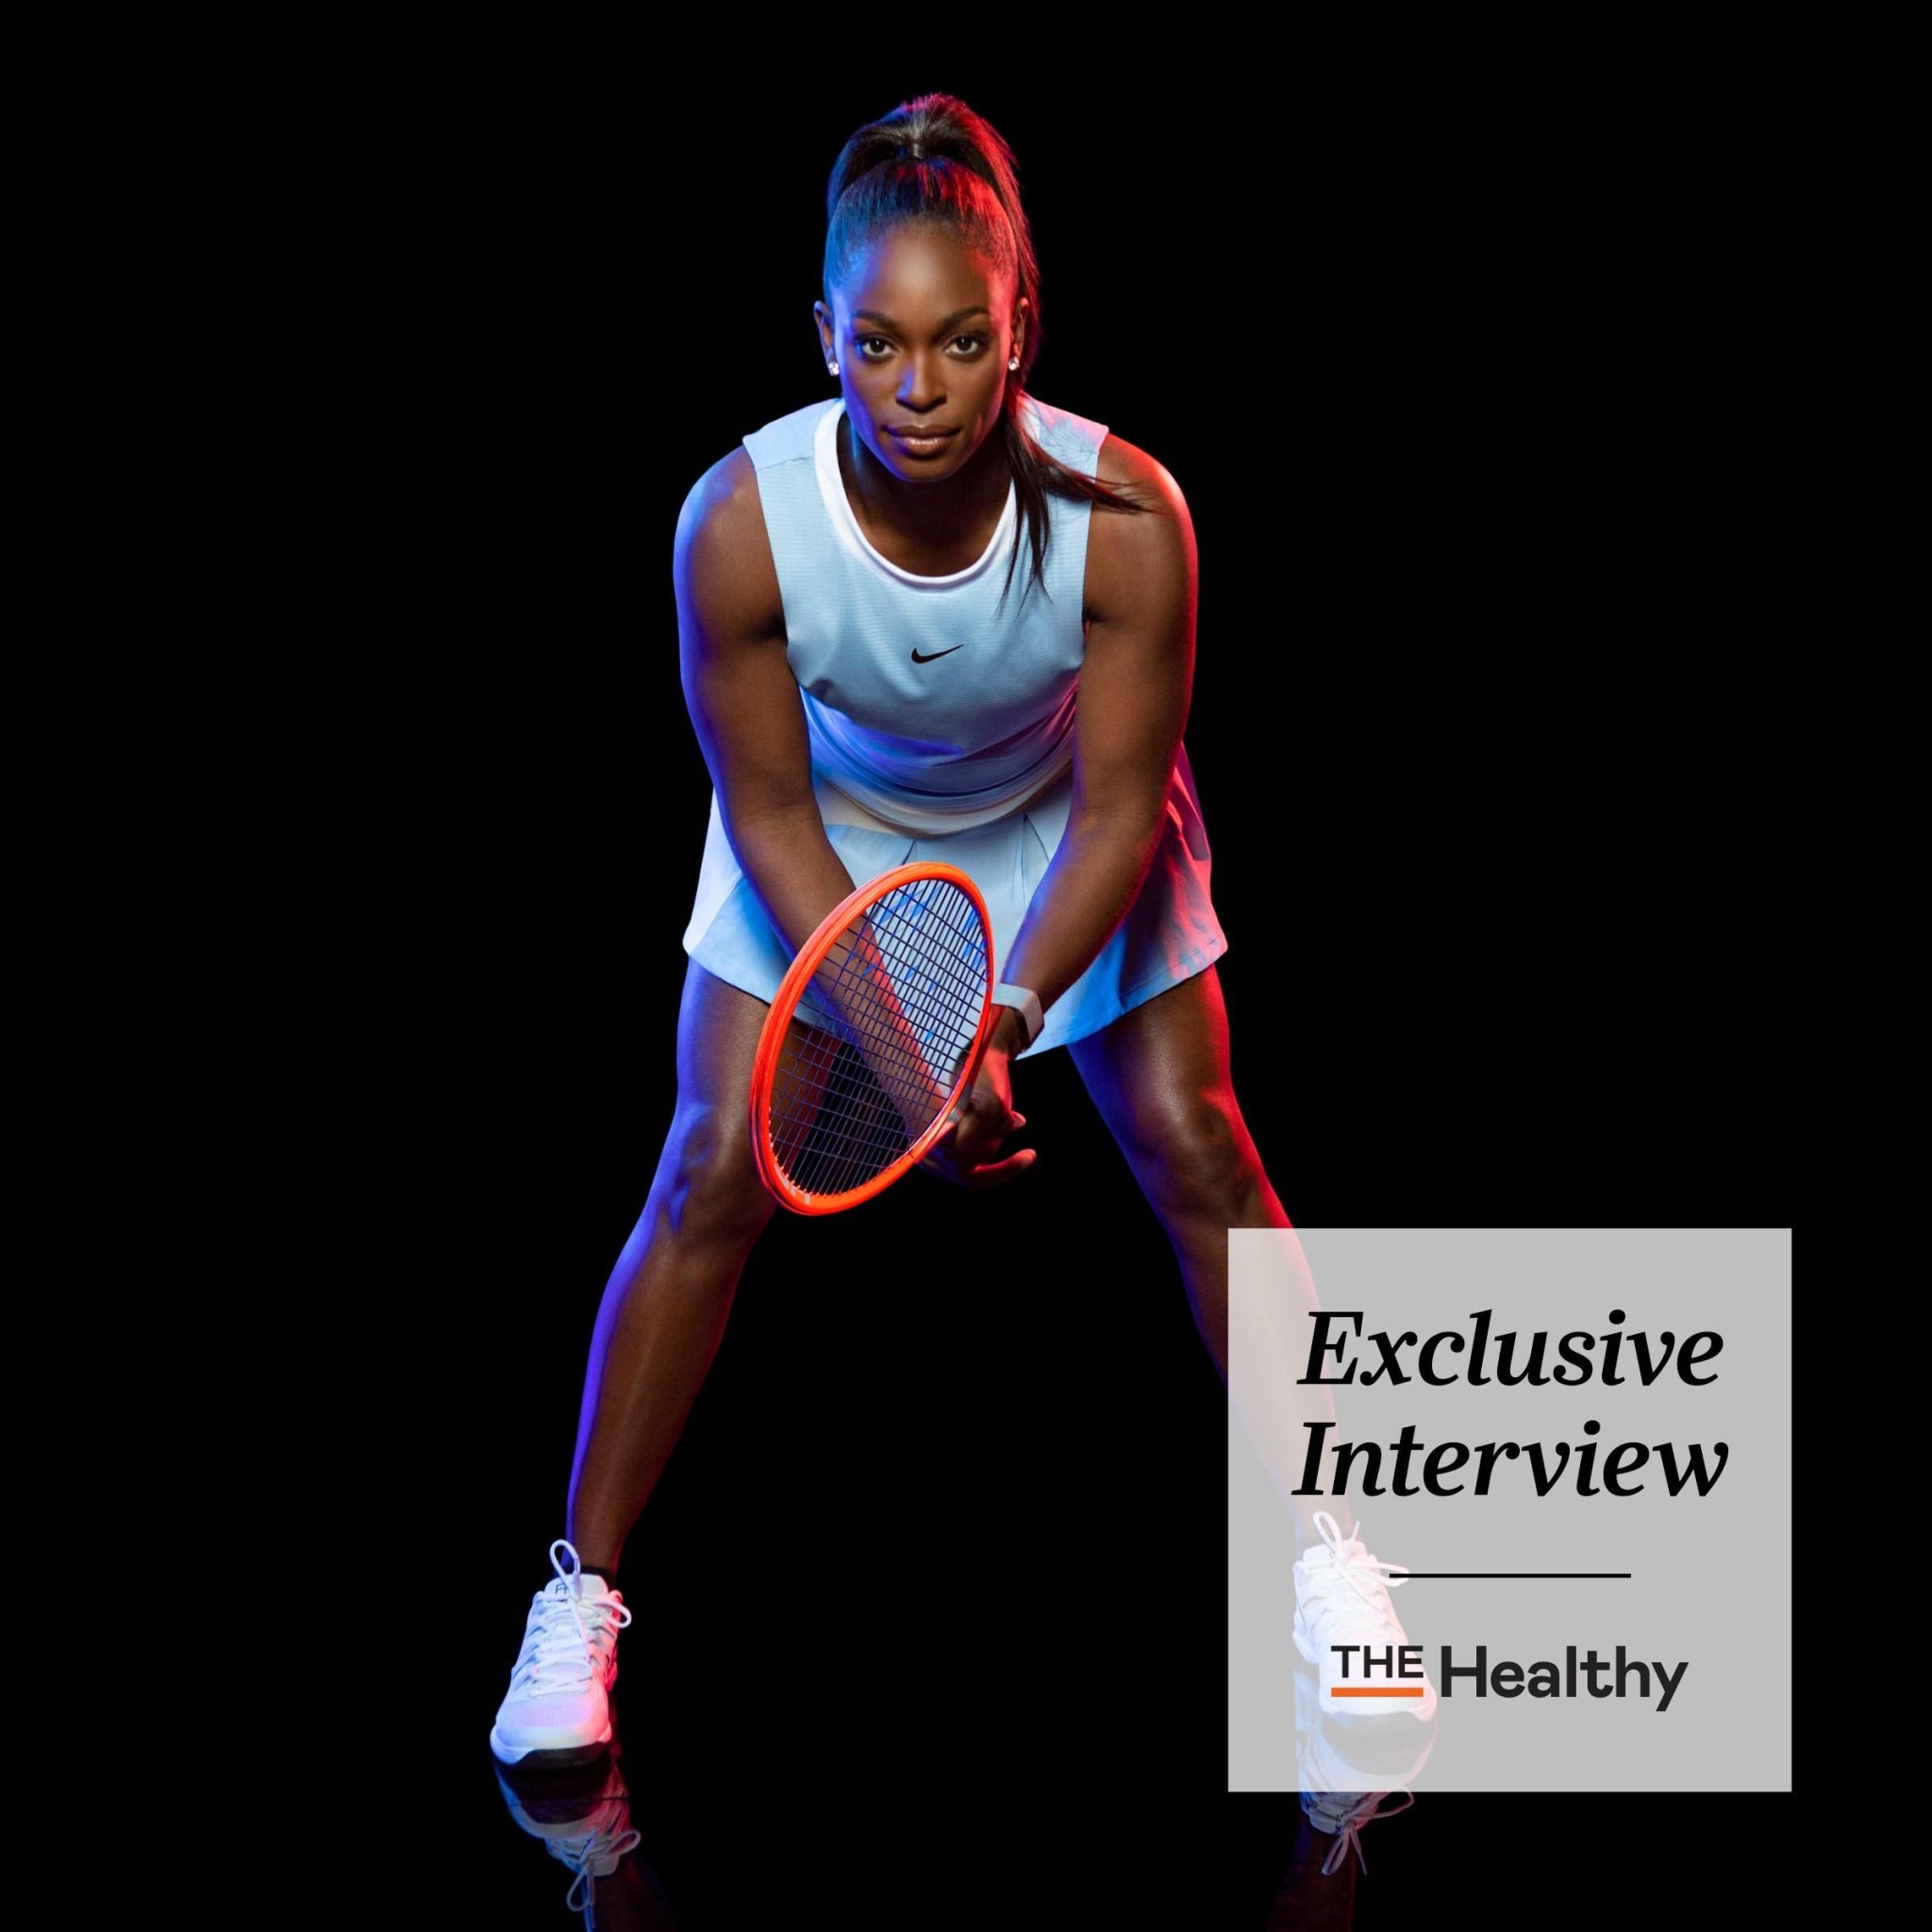 Tennis Pro Sloane Stephens on Staying Positive When You Feel Powerless - cover